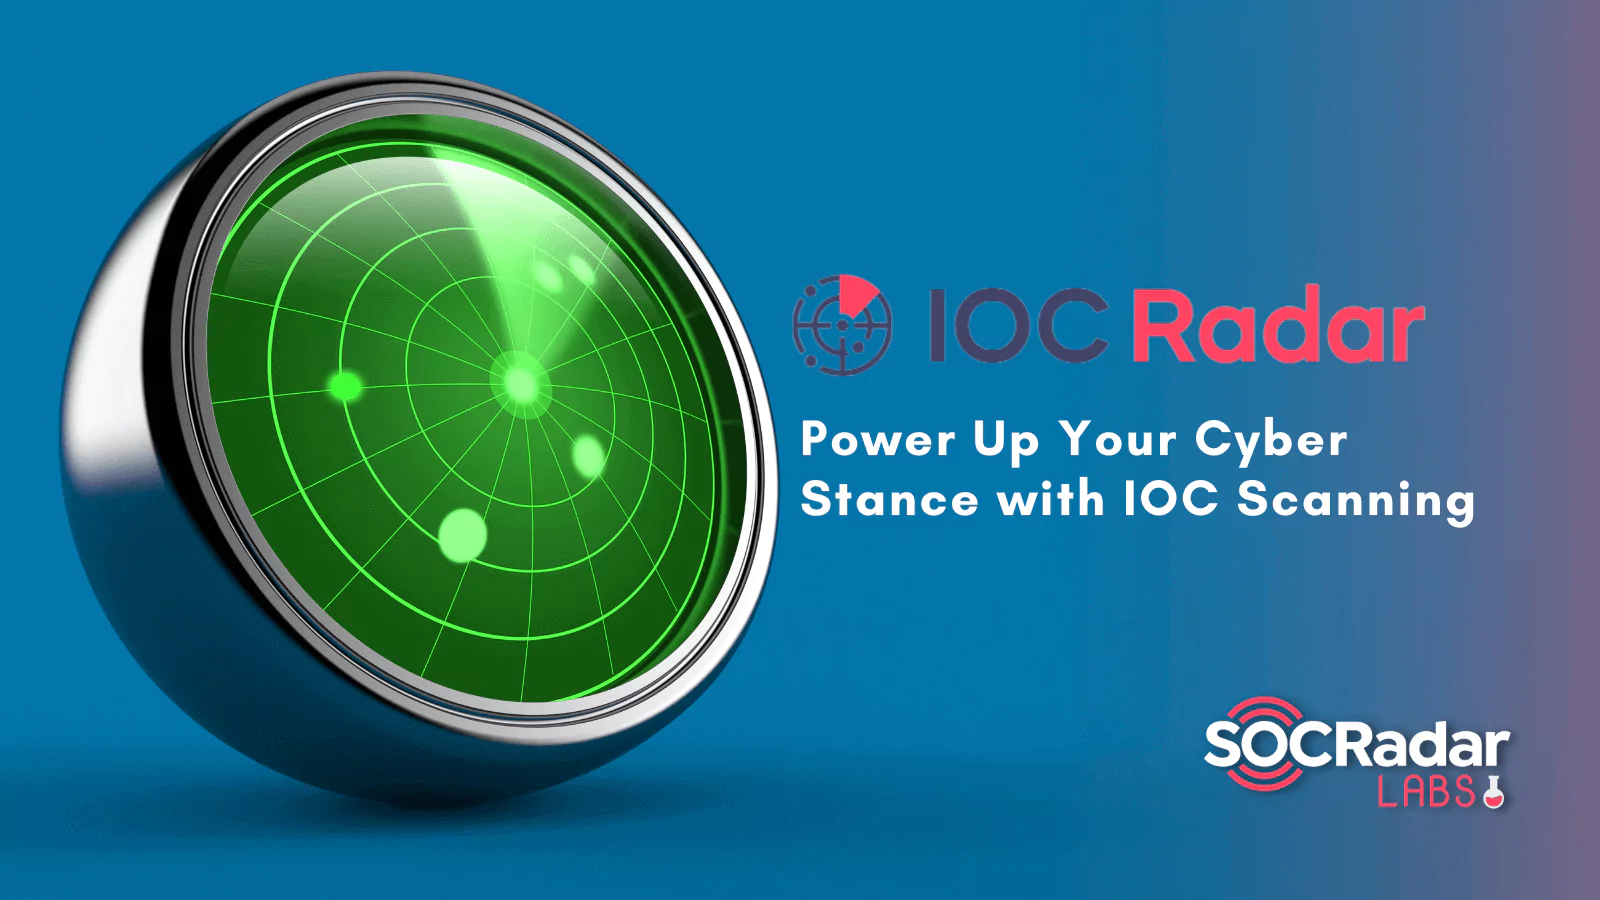 SOCRadar® Cyber Intelligence Inc. | Introducing IOCRadar: Power Up Your Cyber Stance with IOC Scanning